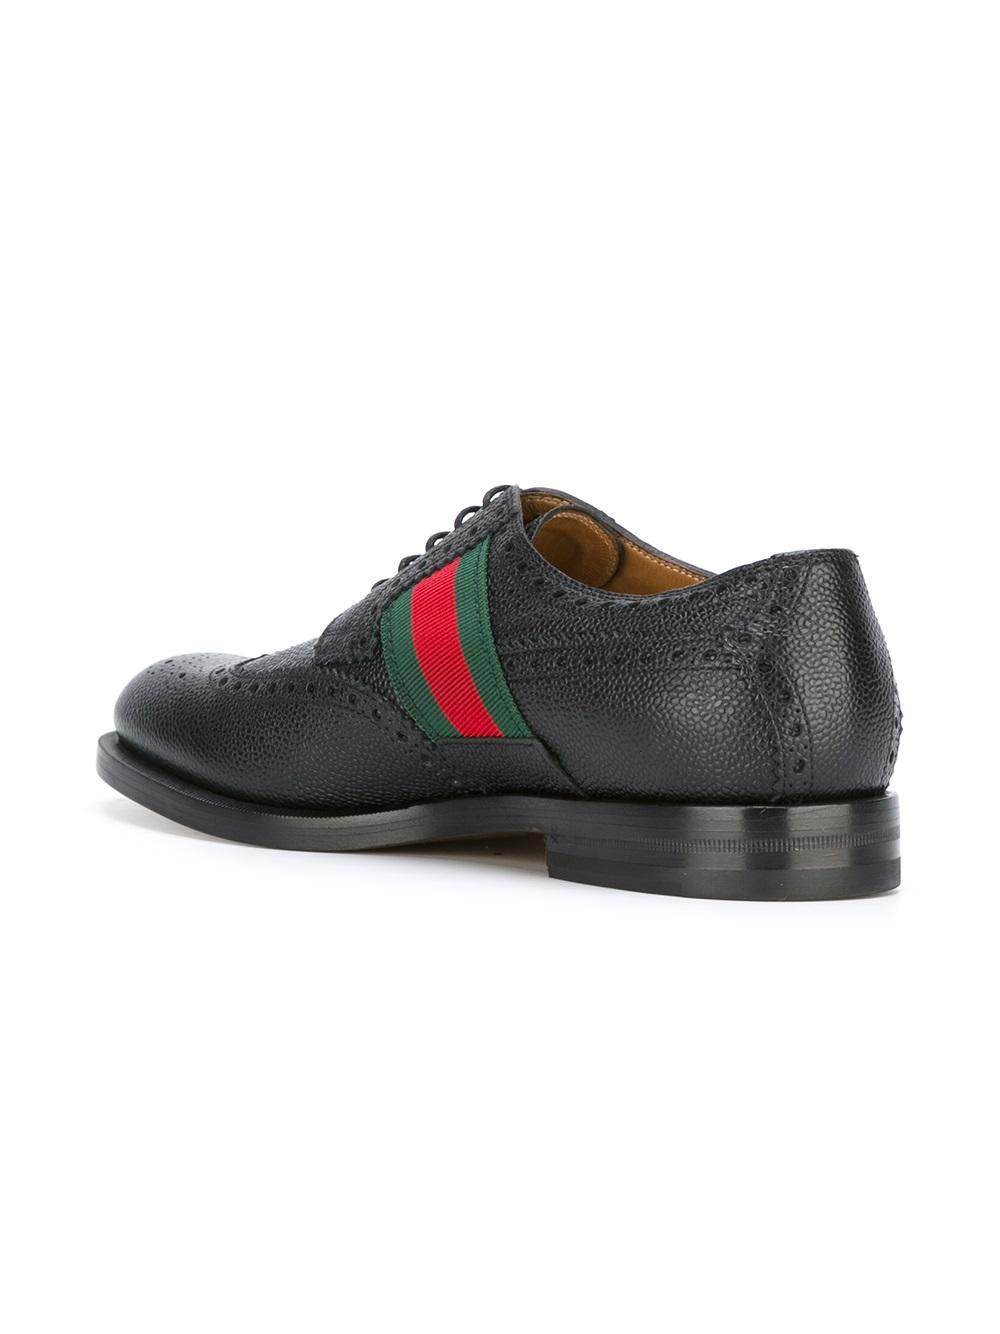 Gucci Leather Strand Wingtip Oxford Shoes in Black for Men | Lyst